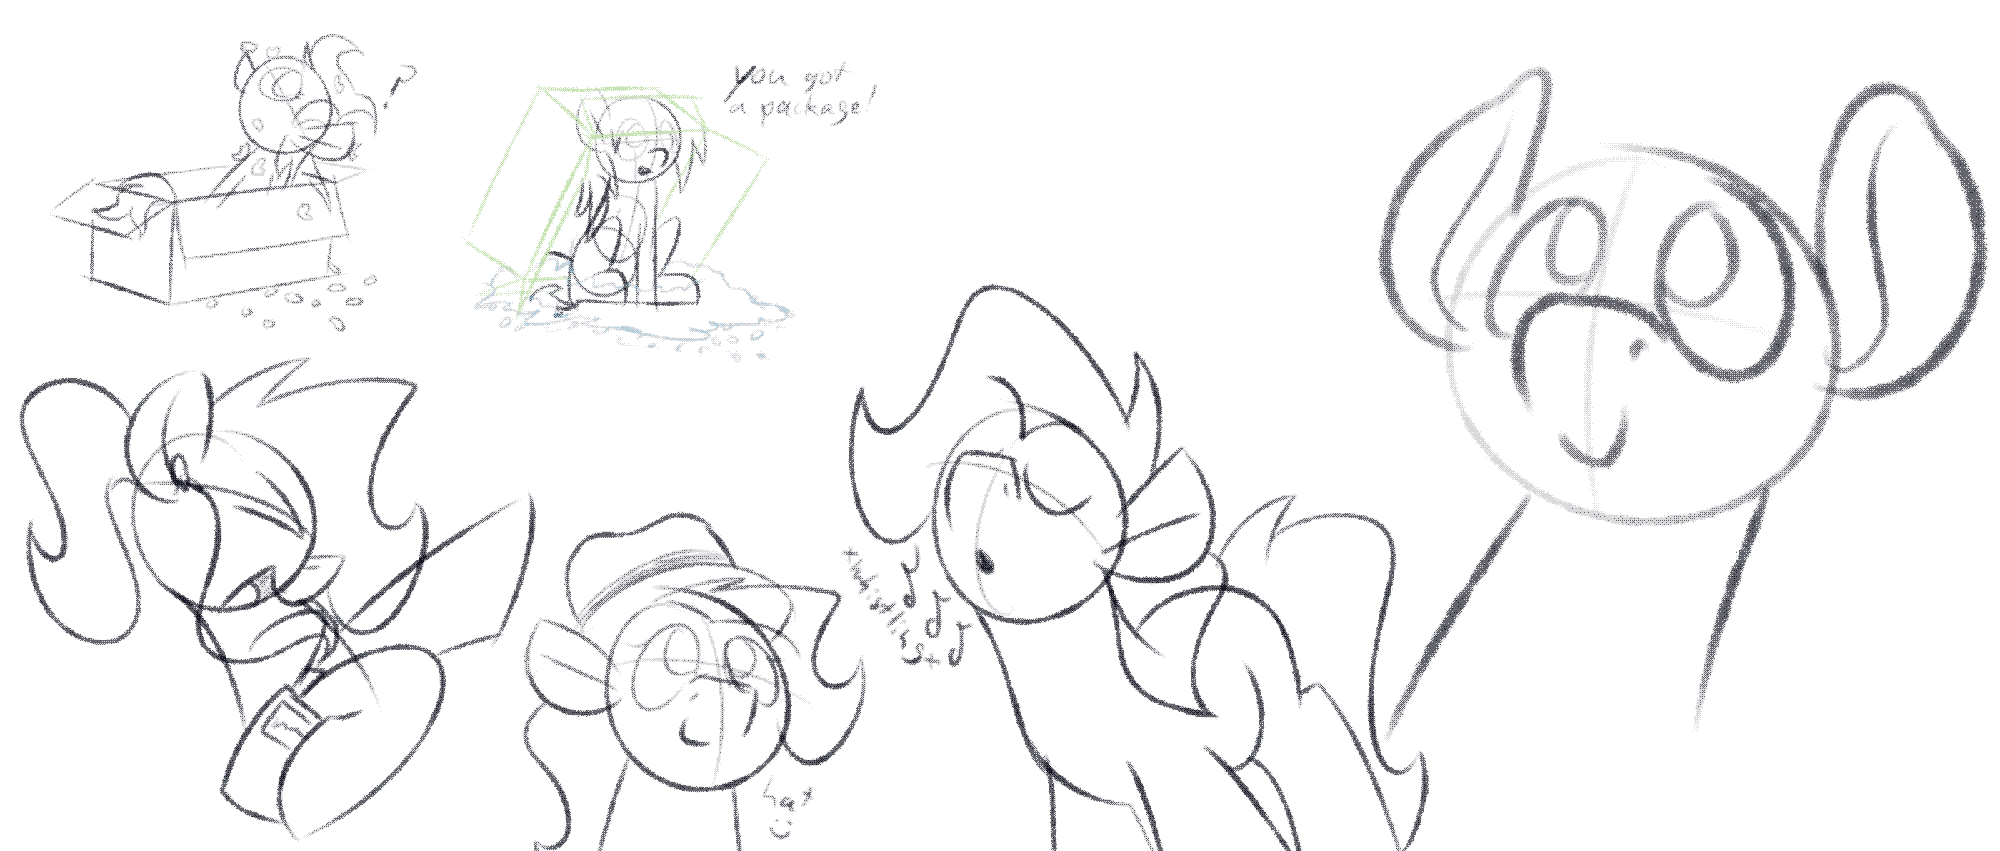 few loose pone sketches, just warmups